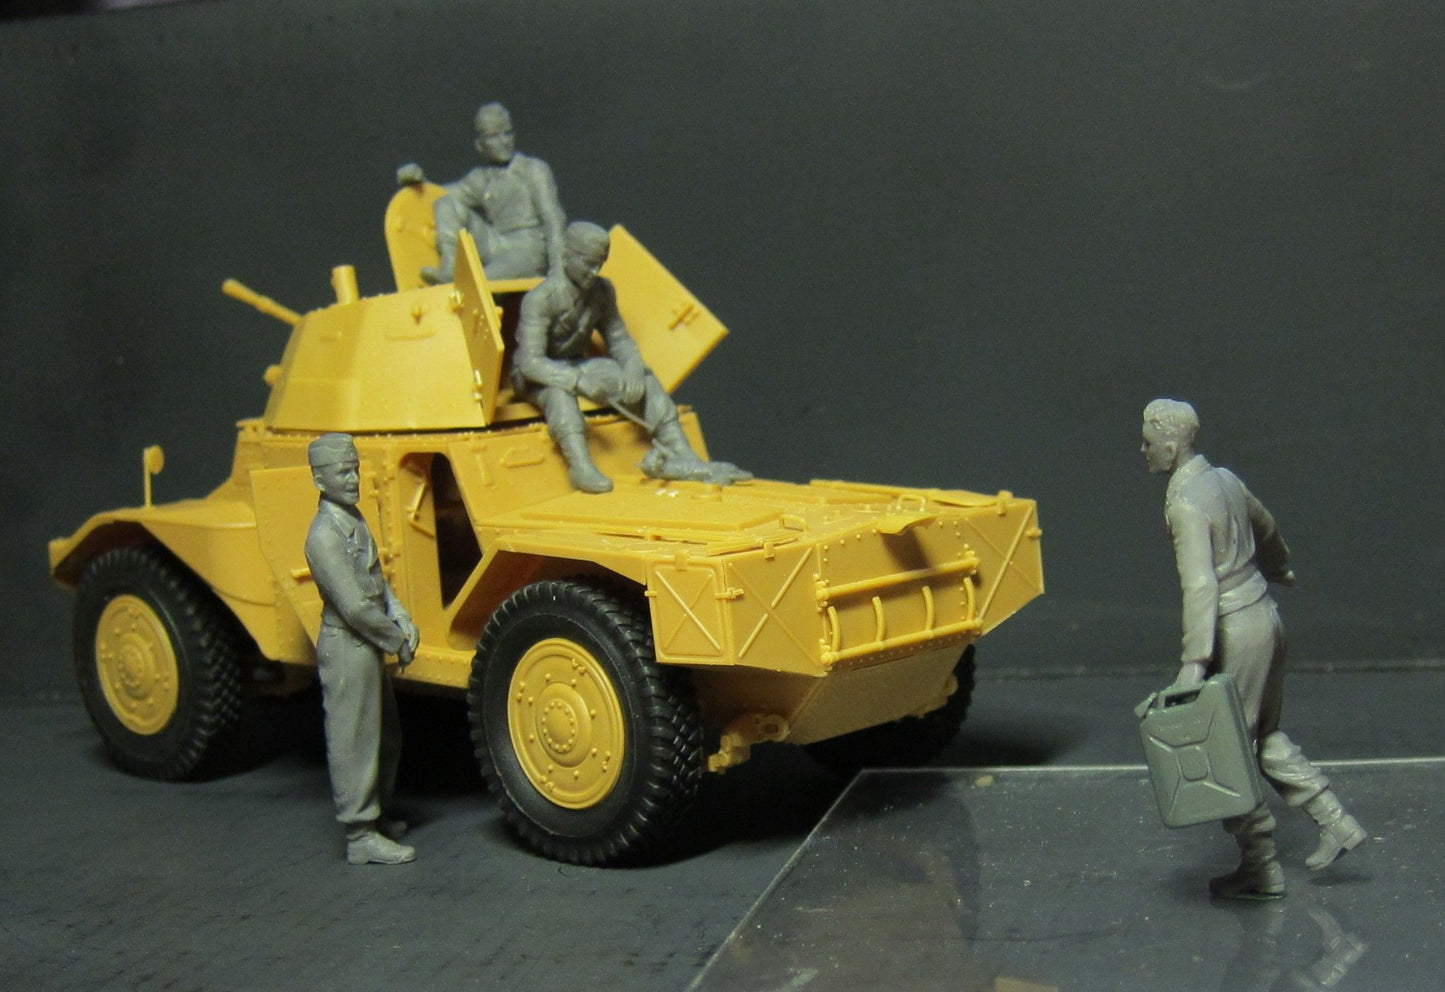 ICM 1/35th scale P 204 (f) with German Arnoured Vehicle crew